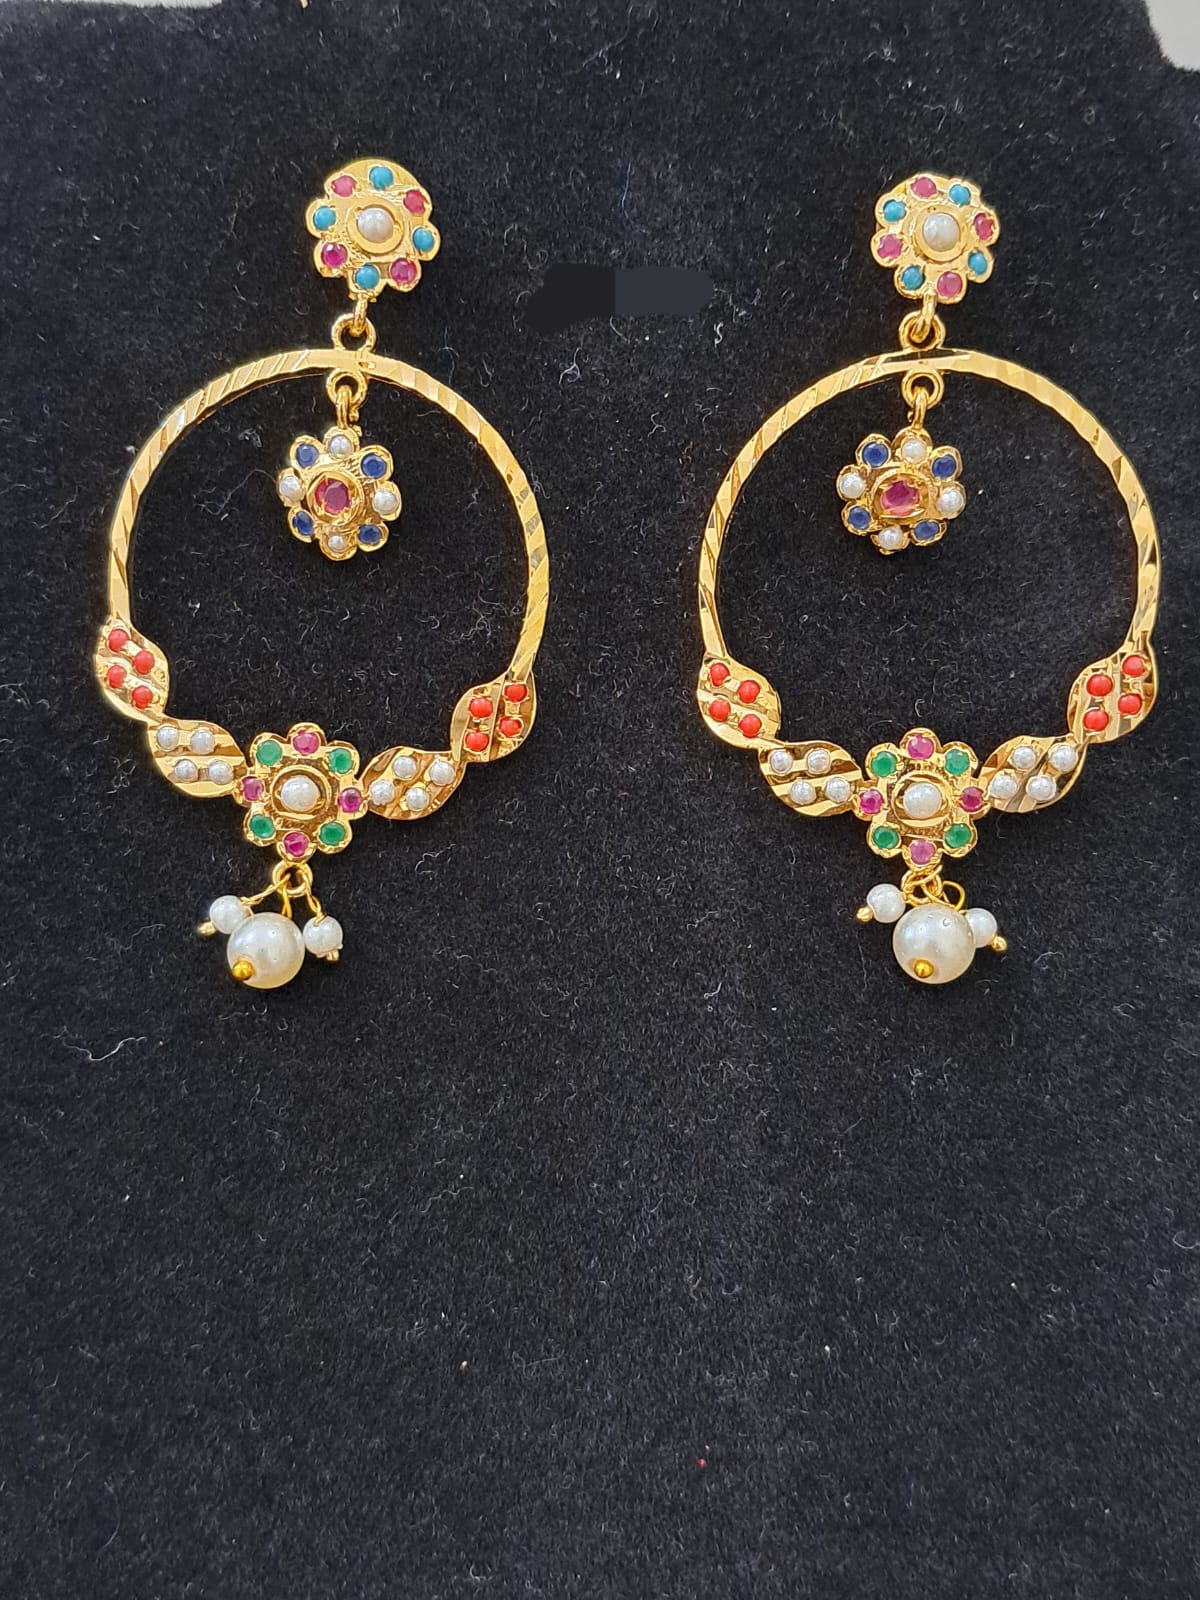 Chand bali ring type with navrathan(multicolor) stones and pearls.